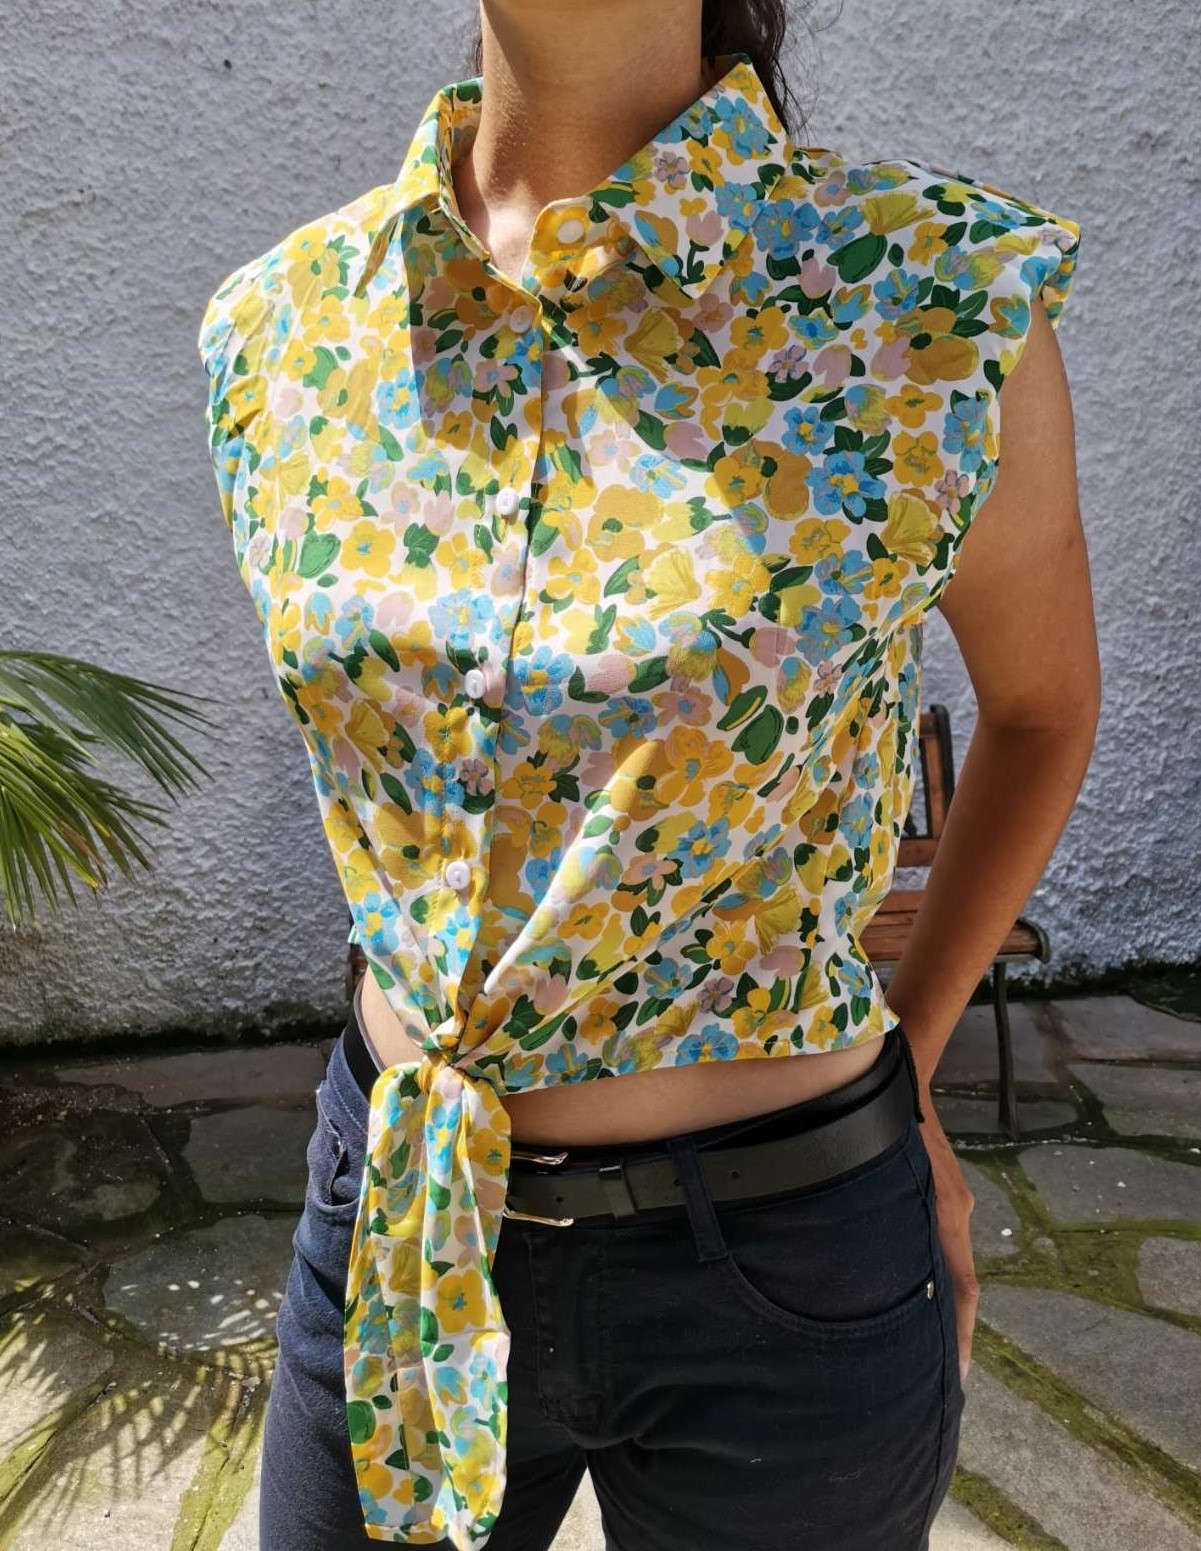 Sleeveless shirt printed with quilts in yellow